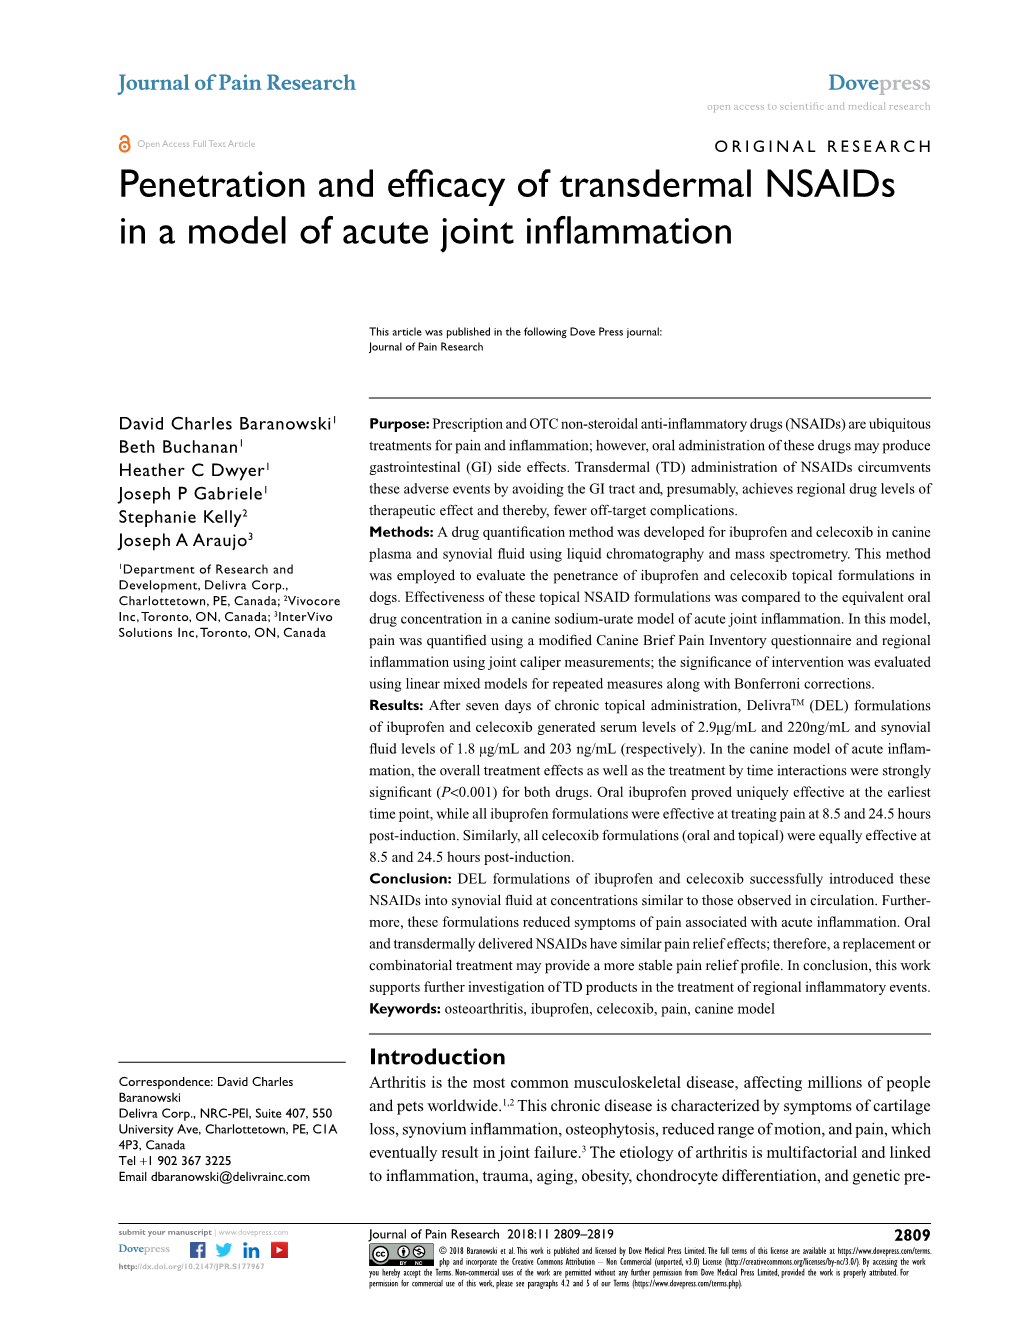 Penetration and Efficacy of Transdermal Nsaids in a Model Of